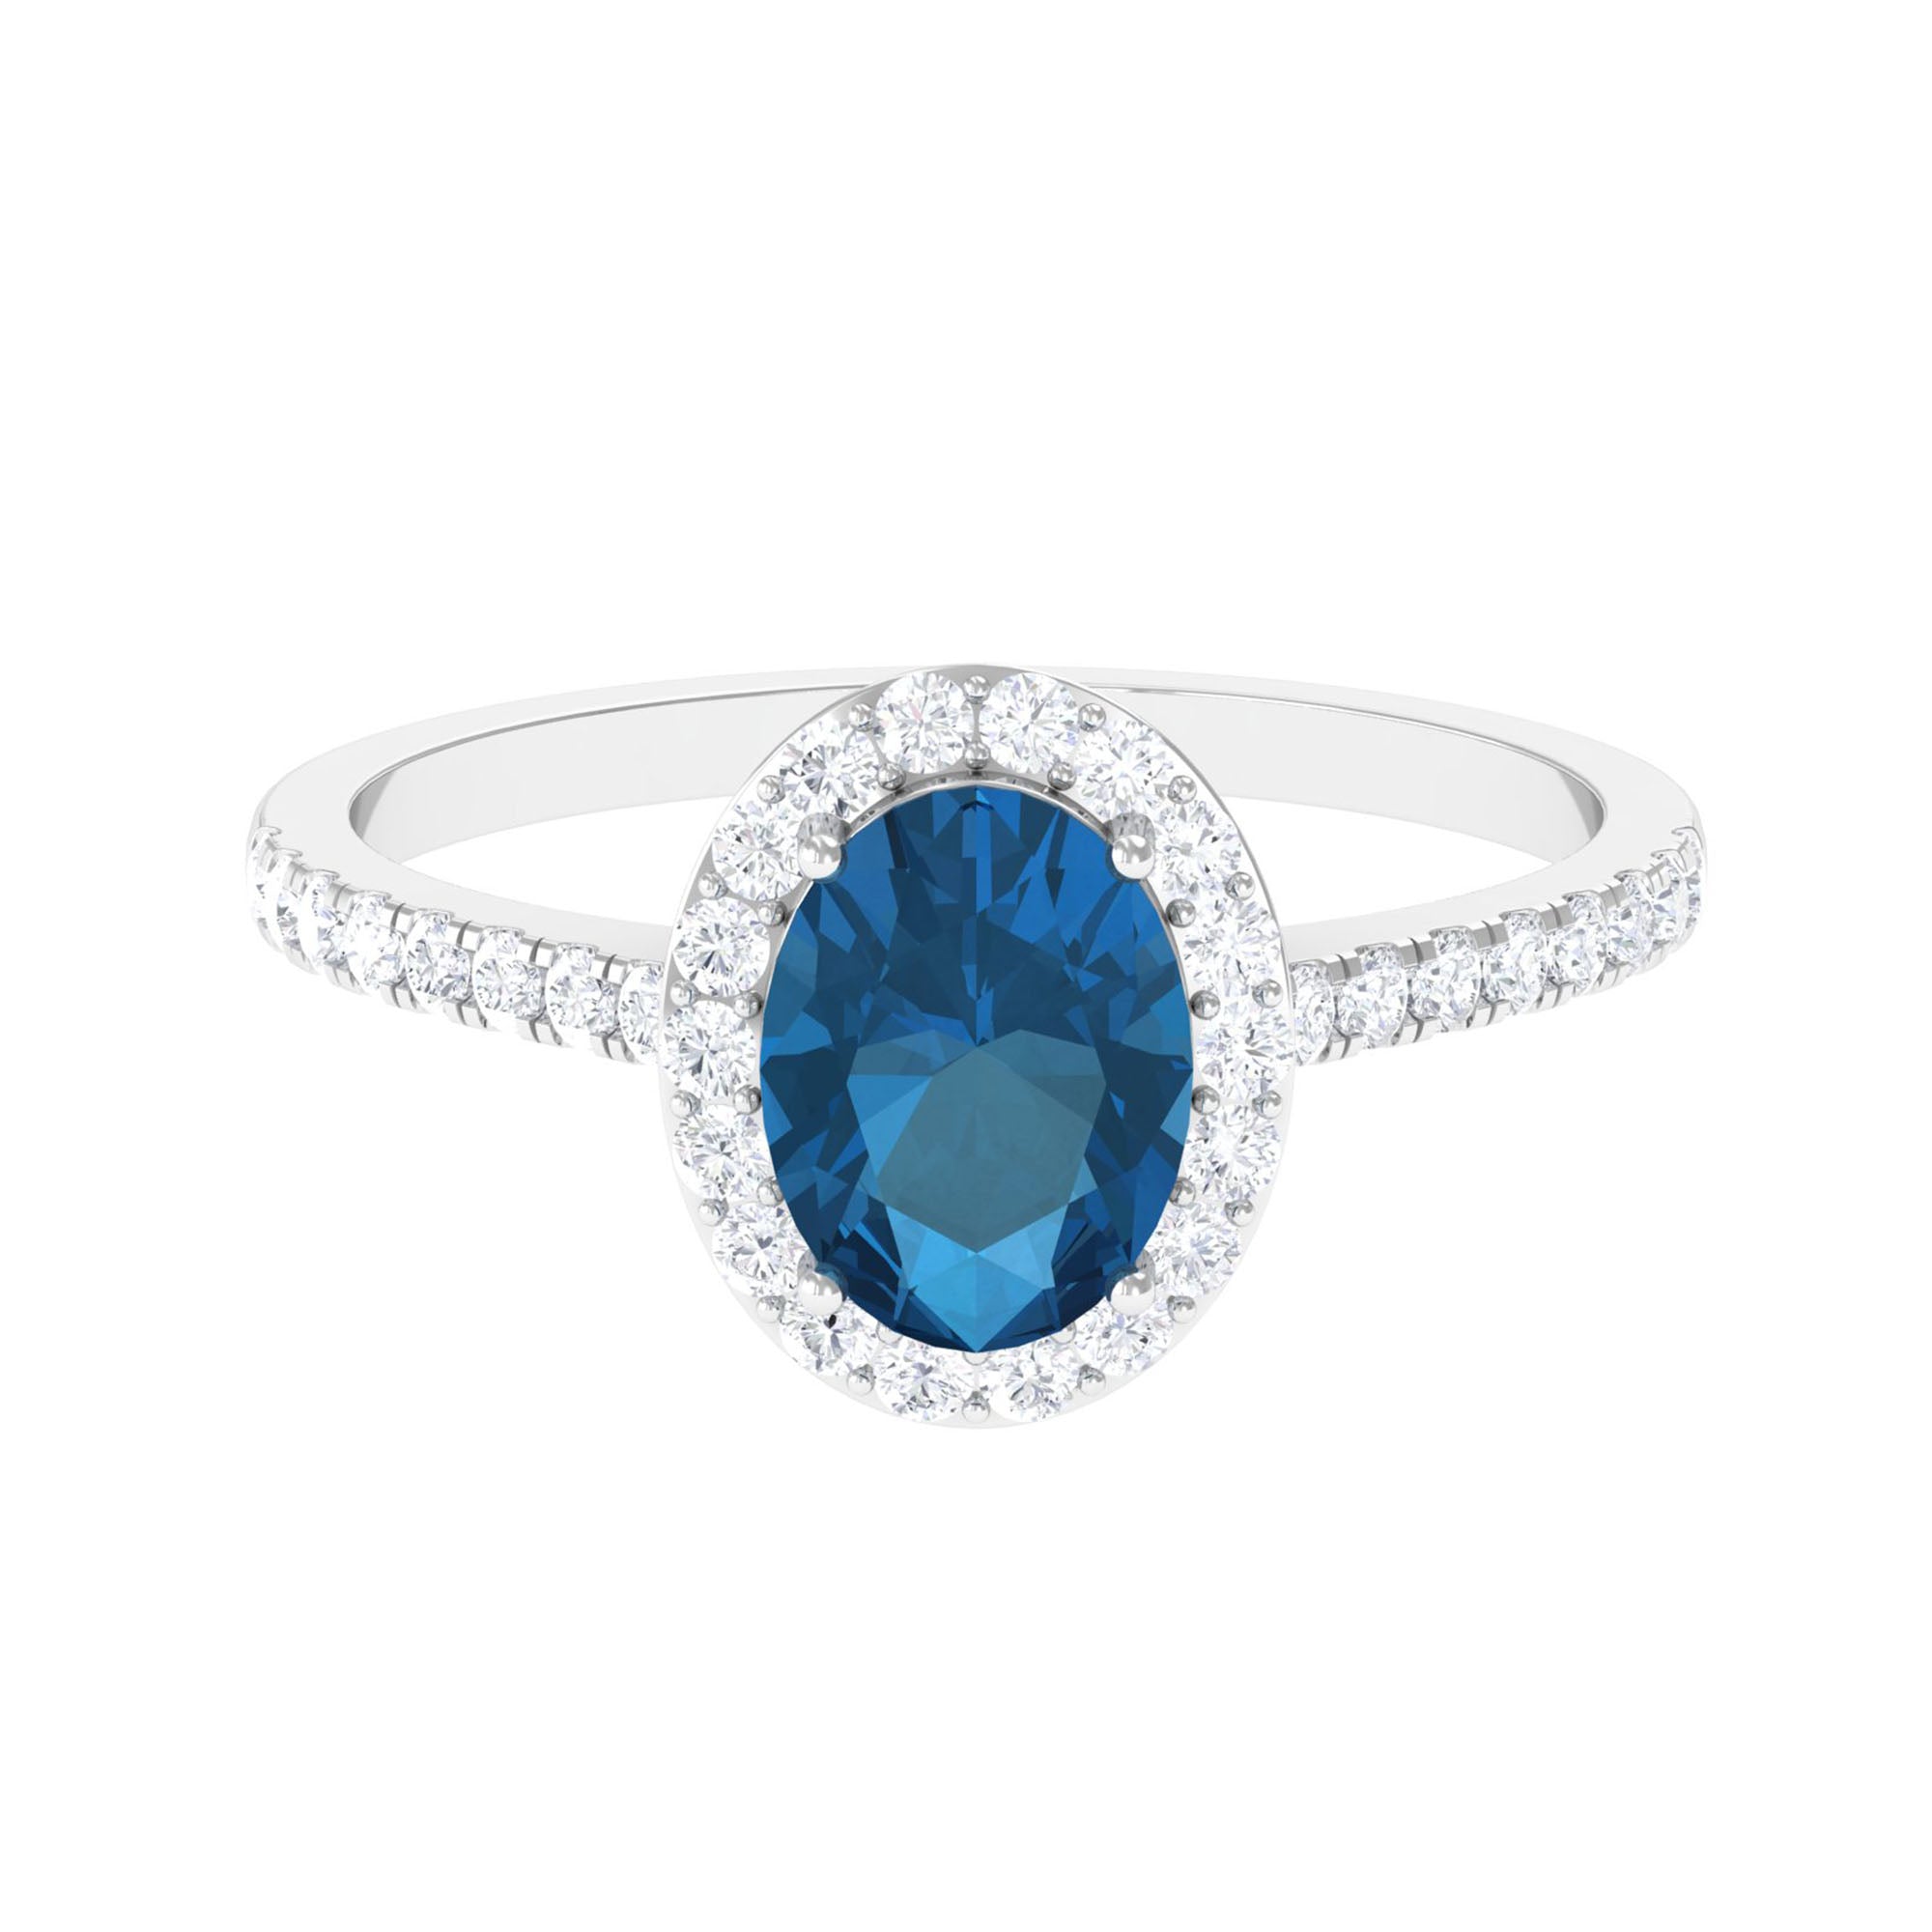 2 CT Oval Cut London Blue Topaz Solitaire Ring with Diamond Halo